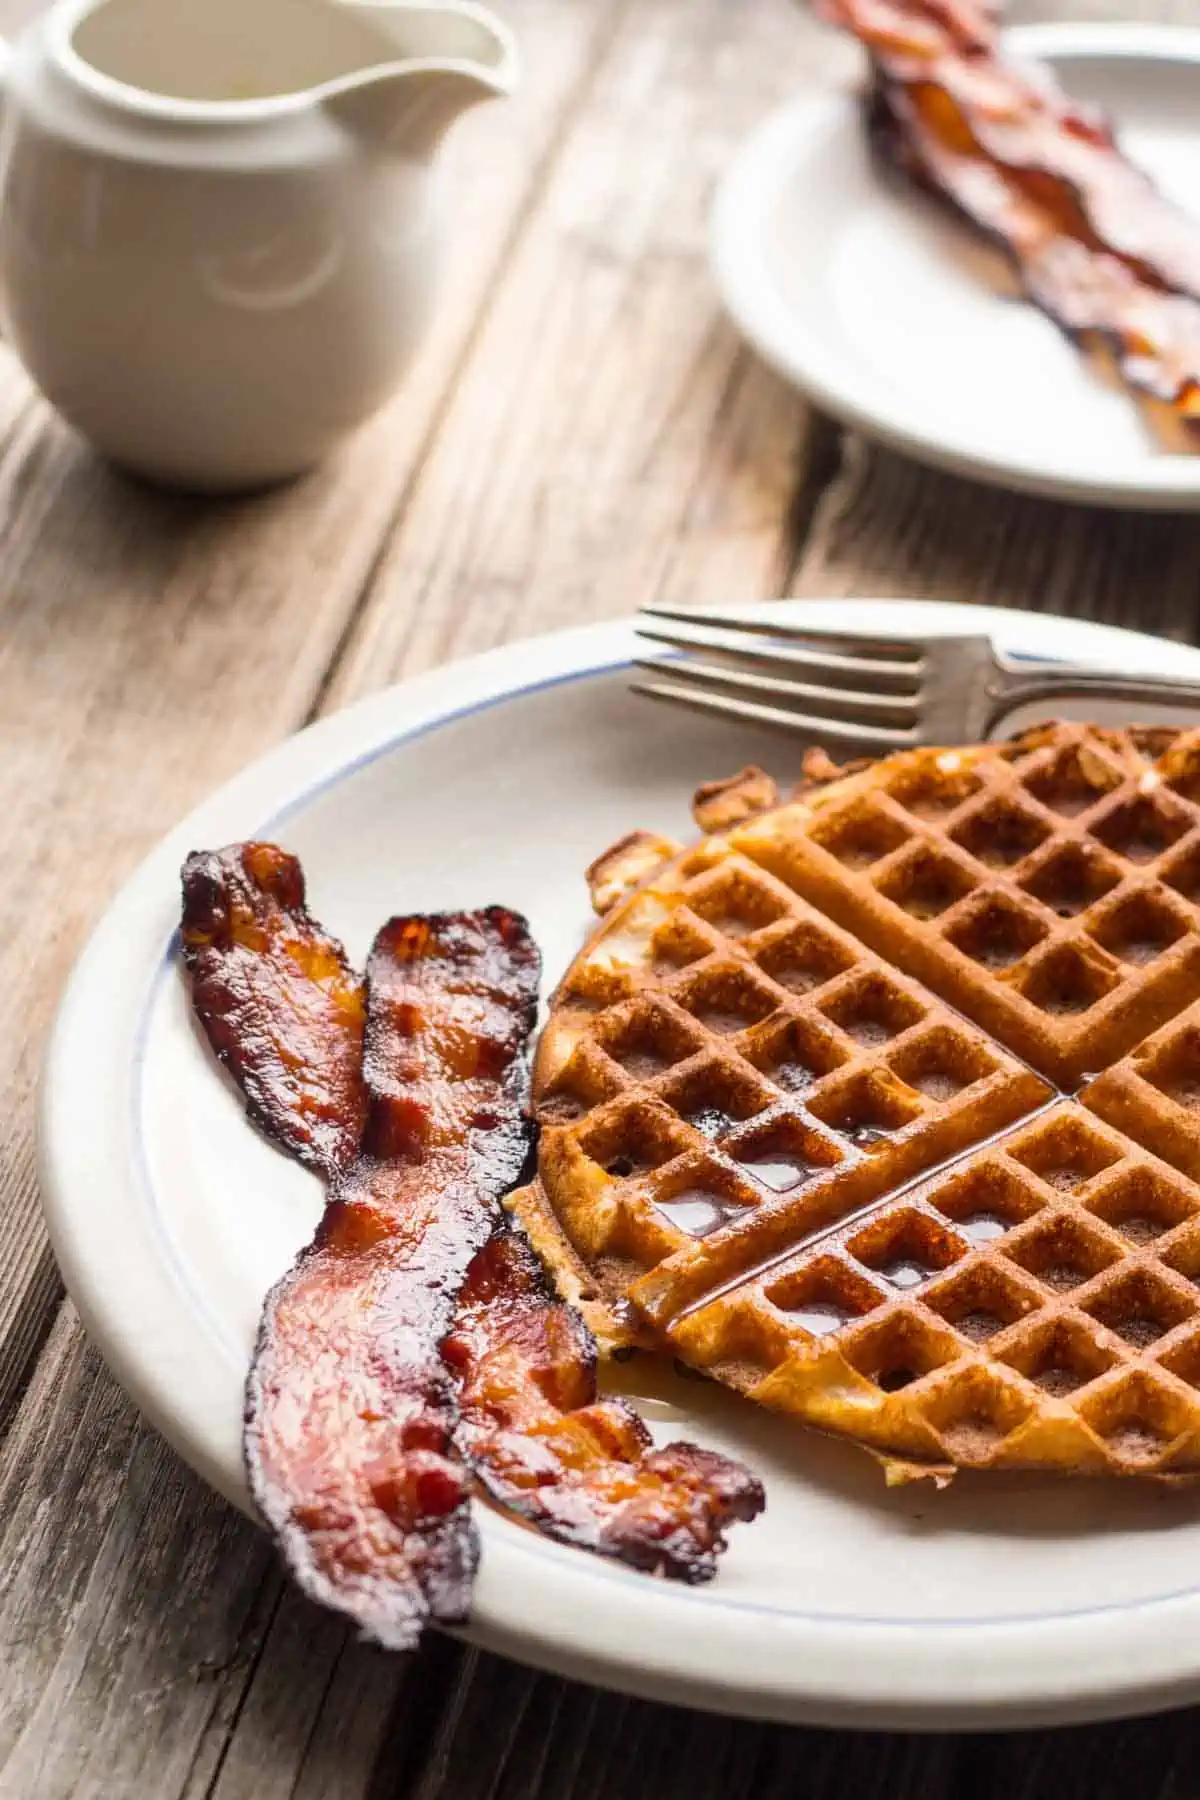 A plate with a waffle and two strips of bacon.